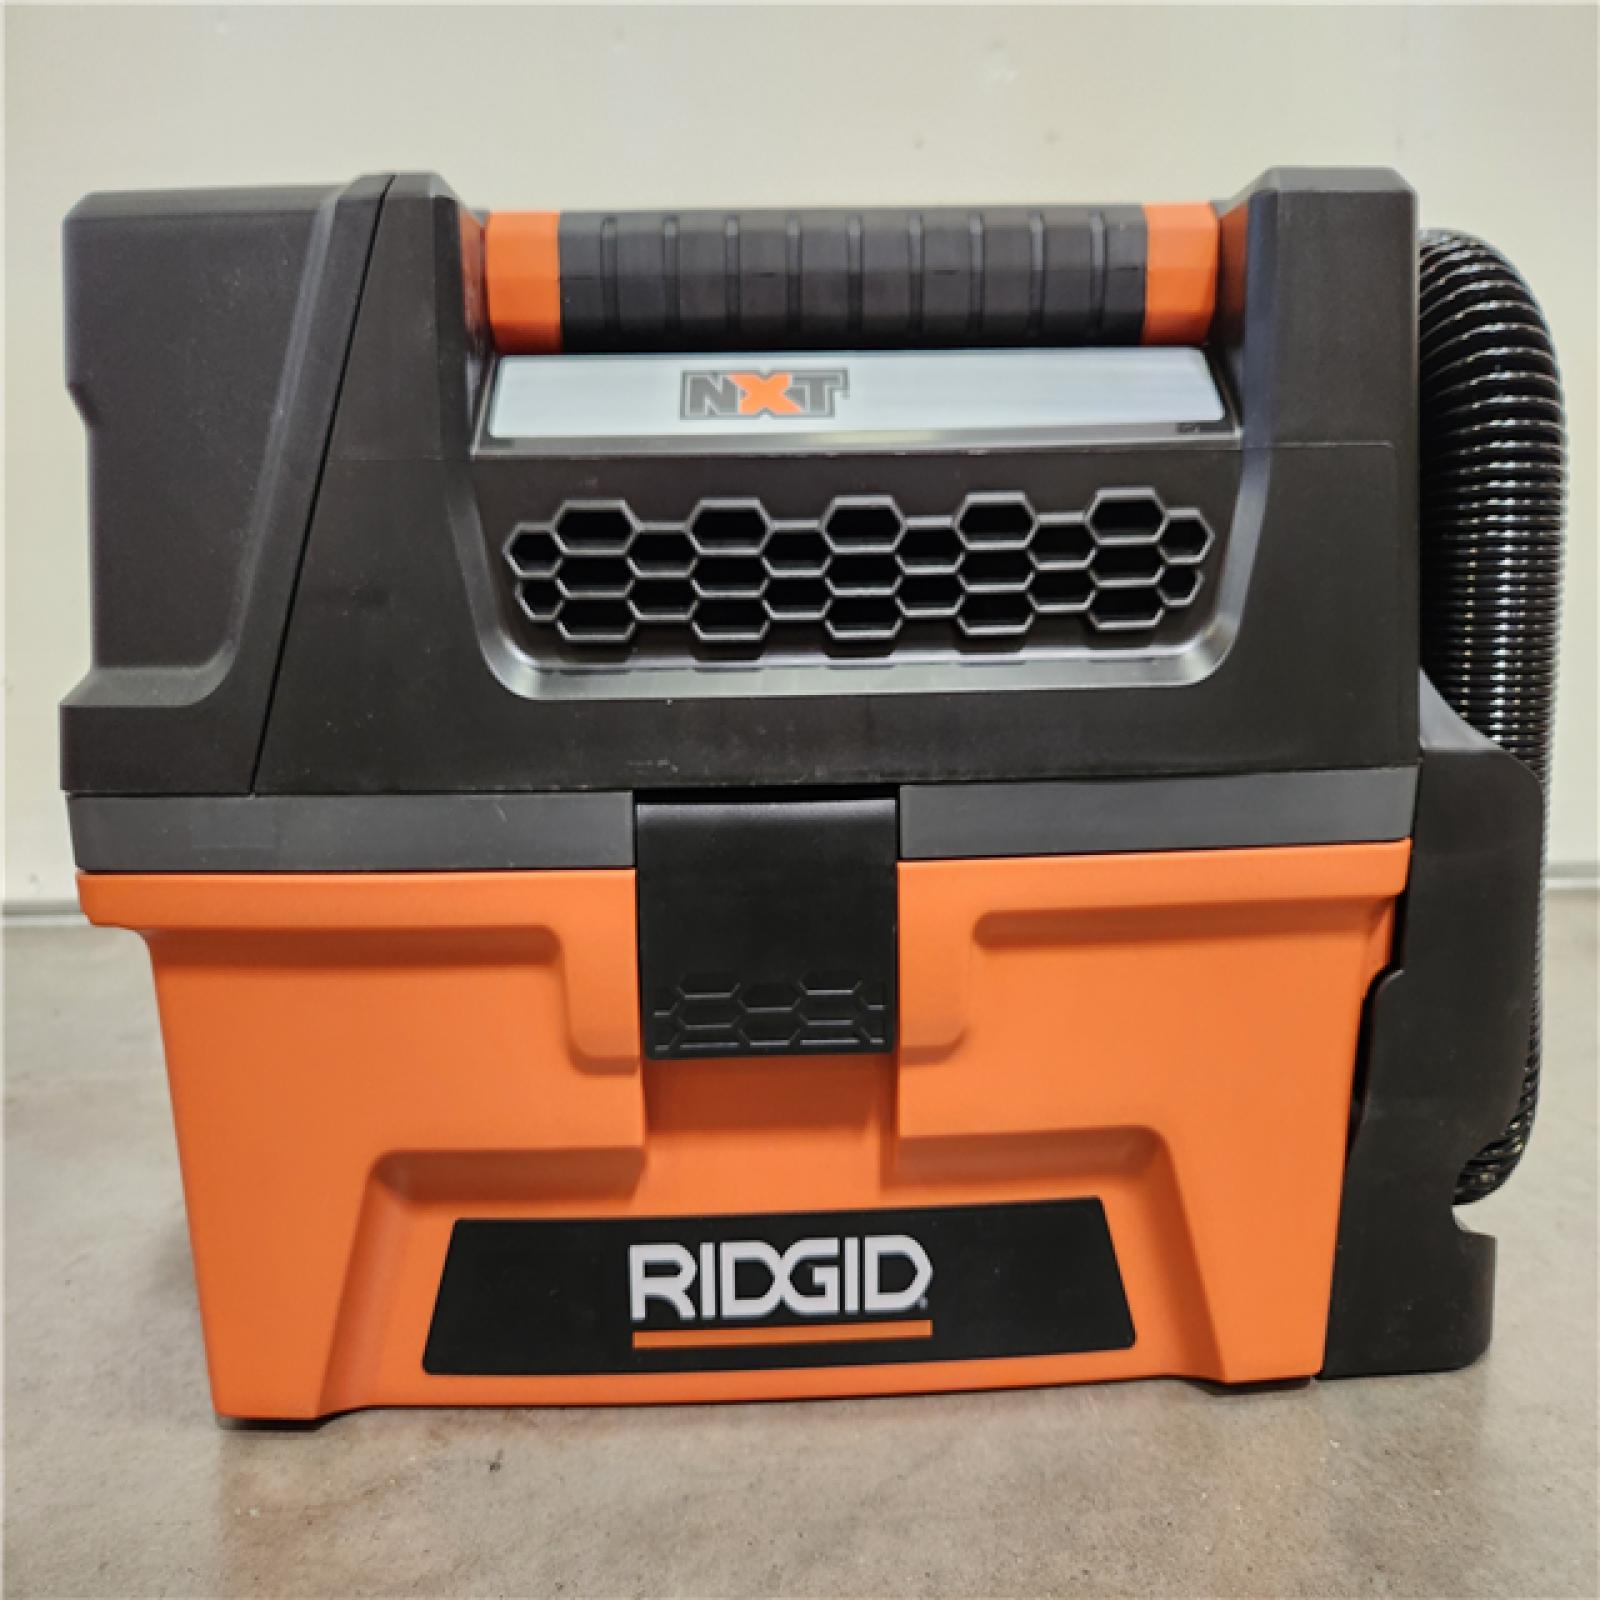 Phoenix Location RIDGID 3 Gallon 5.0 Peak HP NXT Wet/Dry Shop Vacuum with Filter, Expandable Locking Hose and Accessories